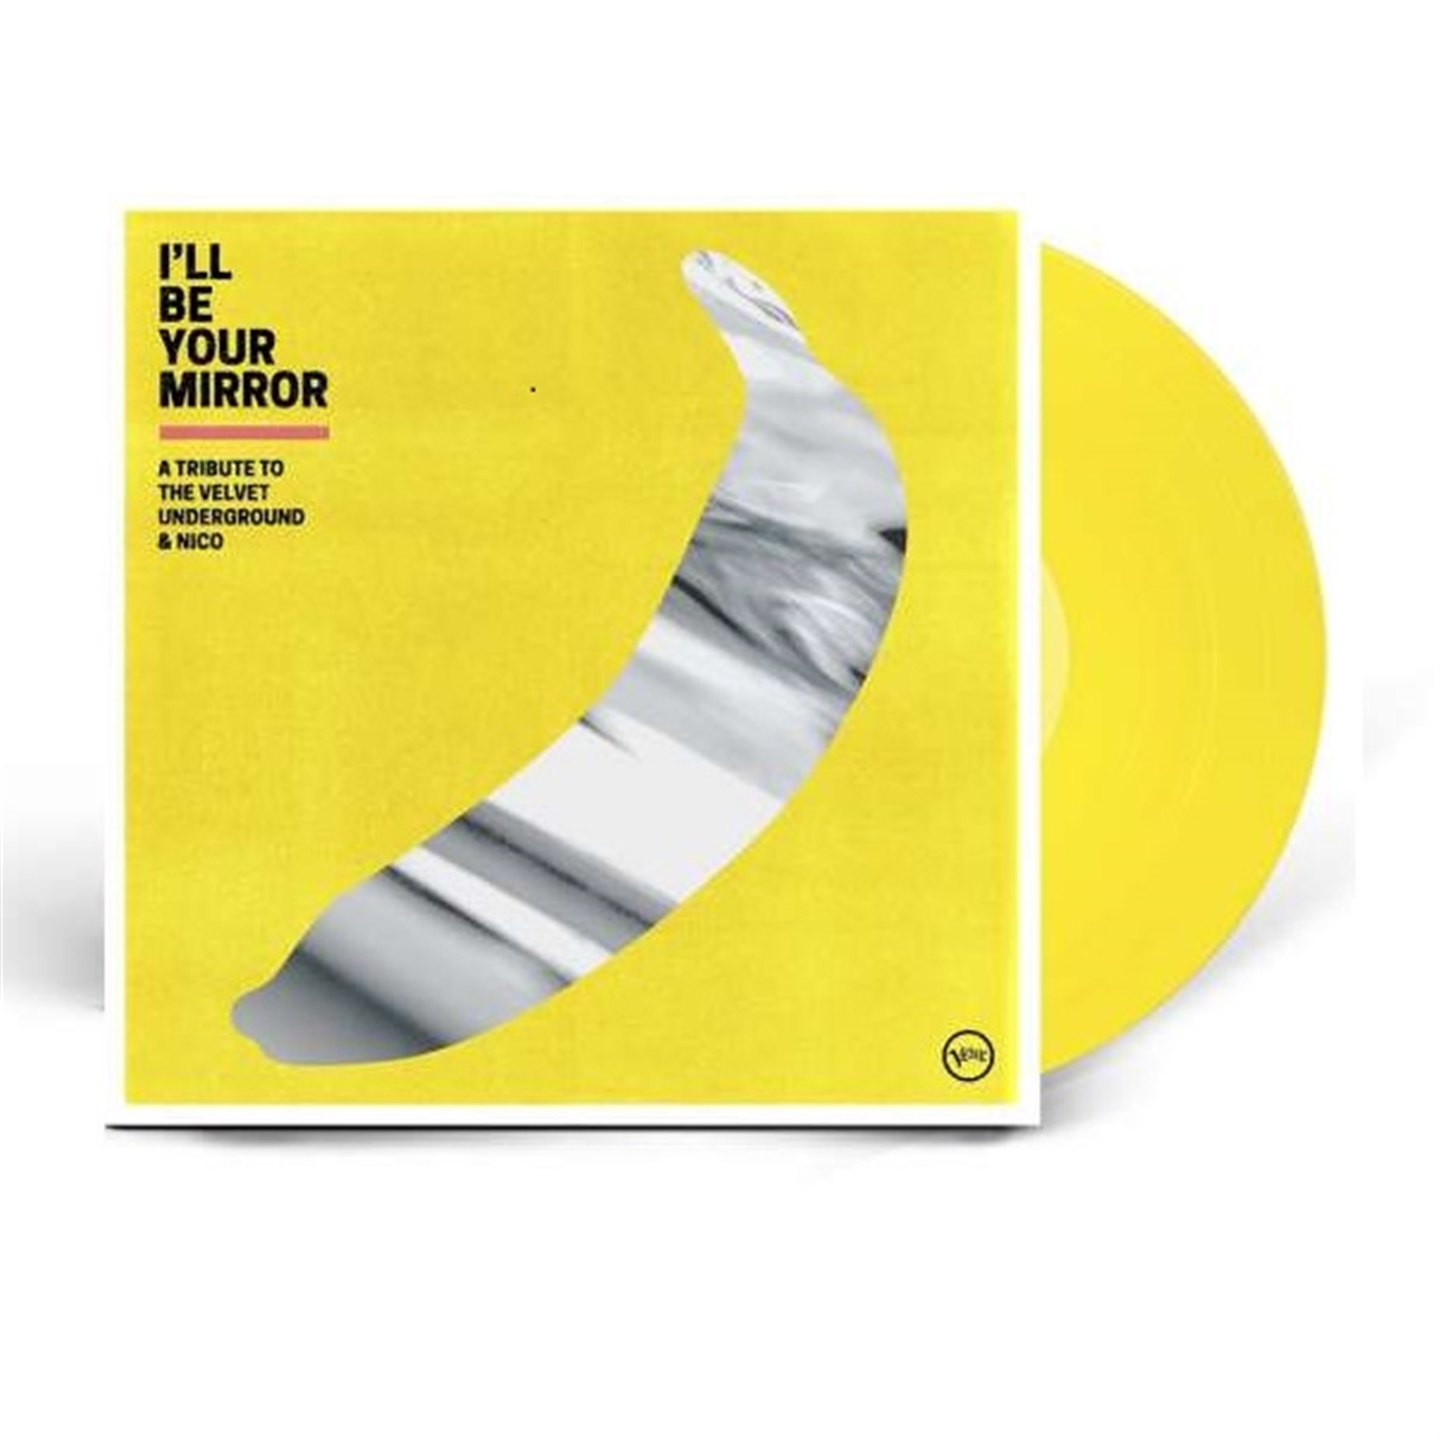 I'LL BE YOUR MIRROR - A TRIBUTE TO THE VELVET UNDERGROUND & NICO - 2LP COLORED